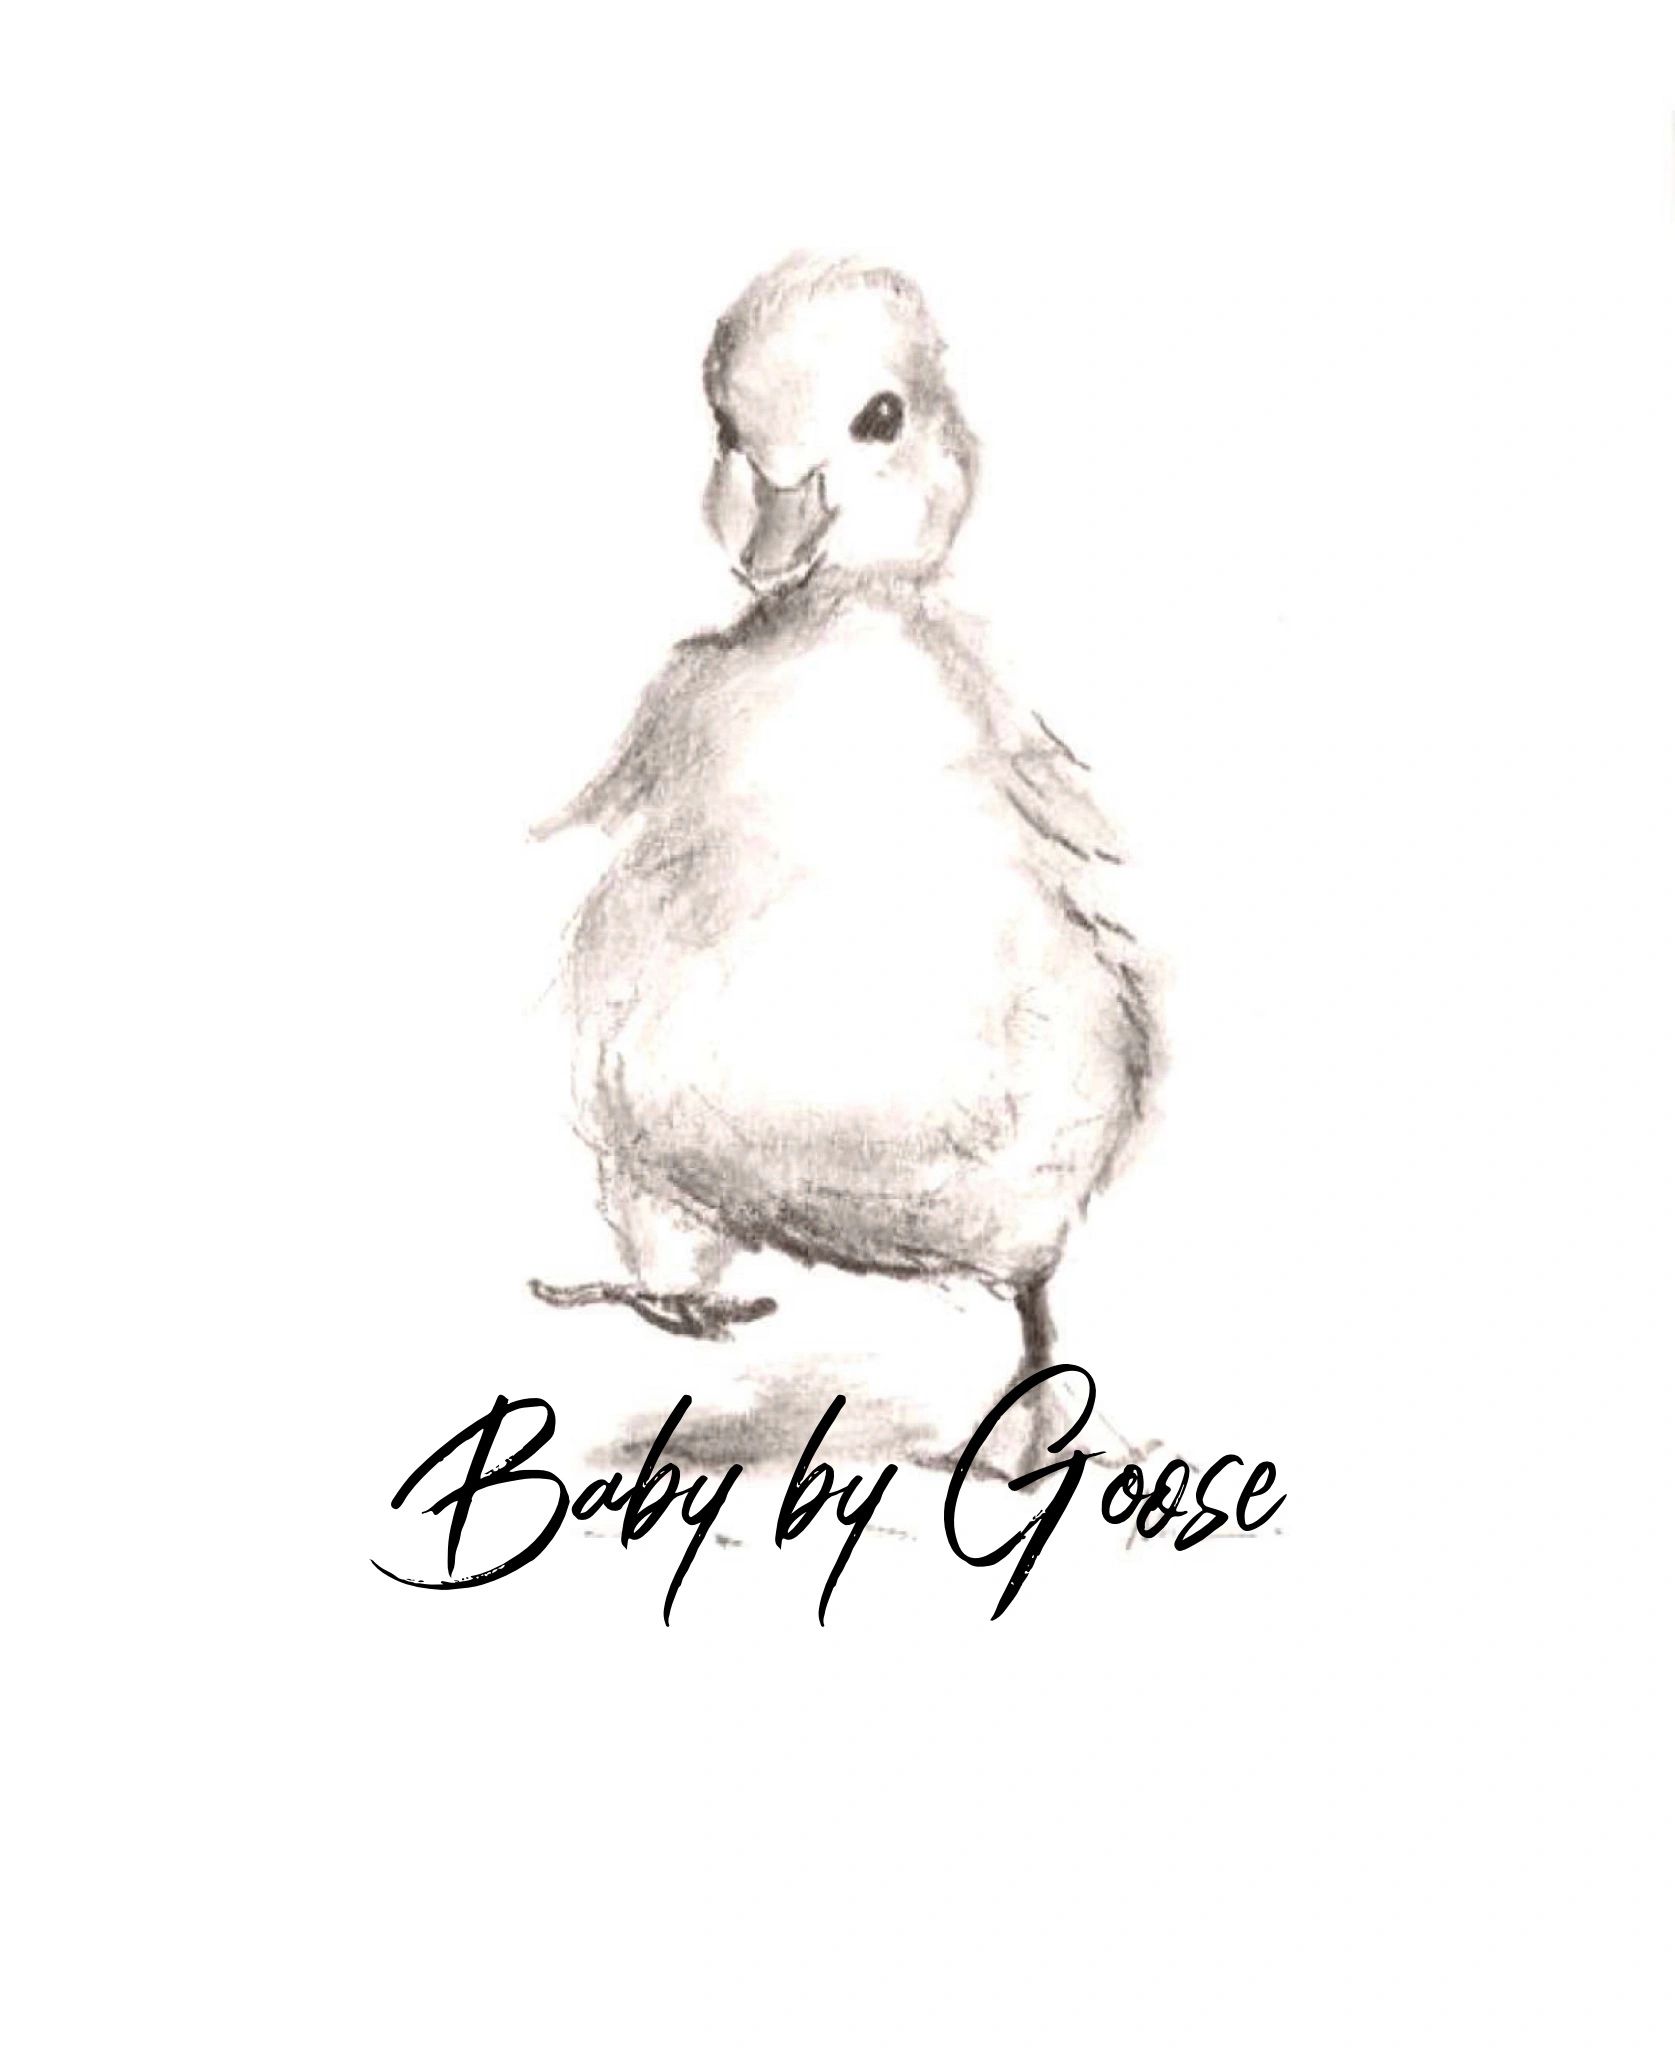 BabybyGoose - Children Clothes, Baby Clothes, Baby Stores